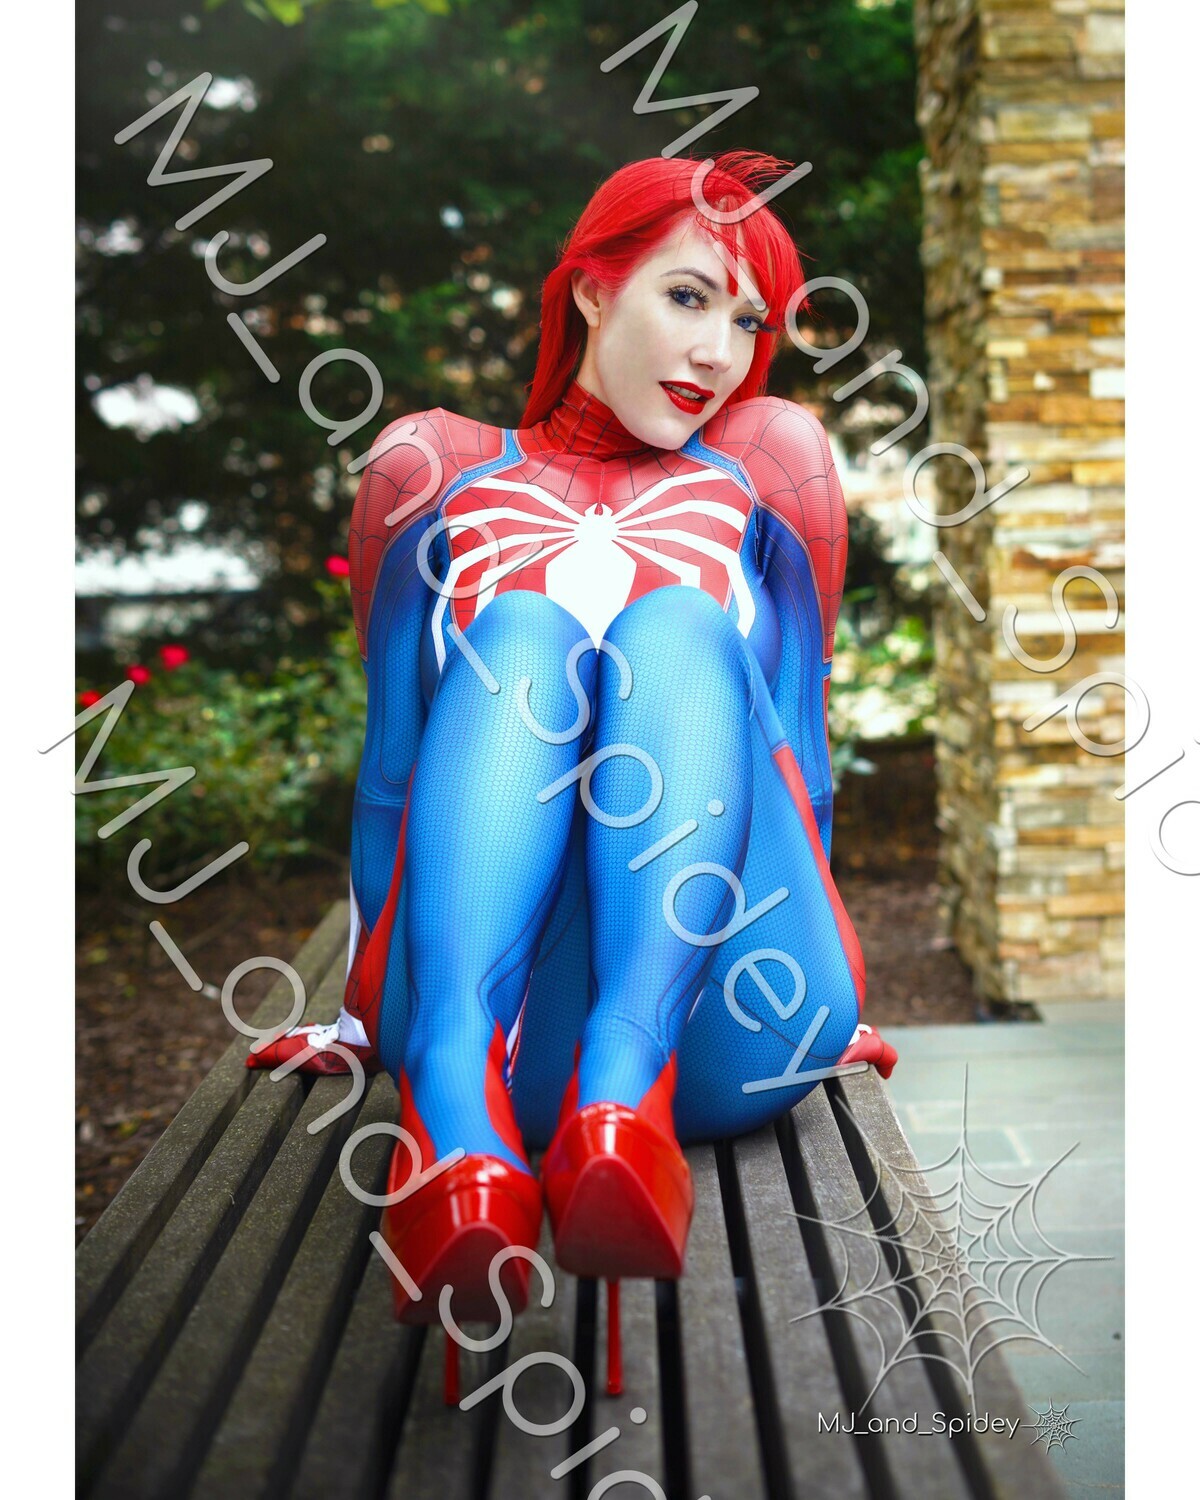 Marvel - Spider-Man - Mary Jane Watson - PS4 Insomniac Spider-Suit No. 3 - Digital Cosplay Image (@MJ_and_Spidey, MJ and Spidey, Comics)